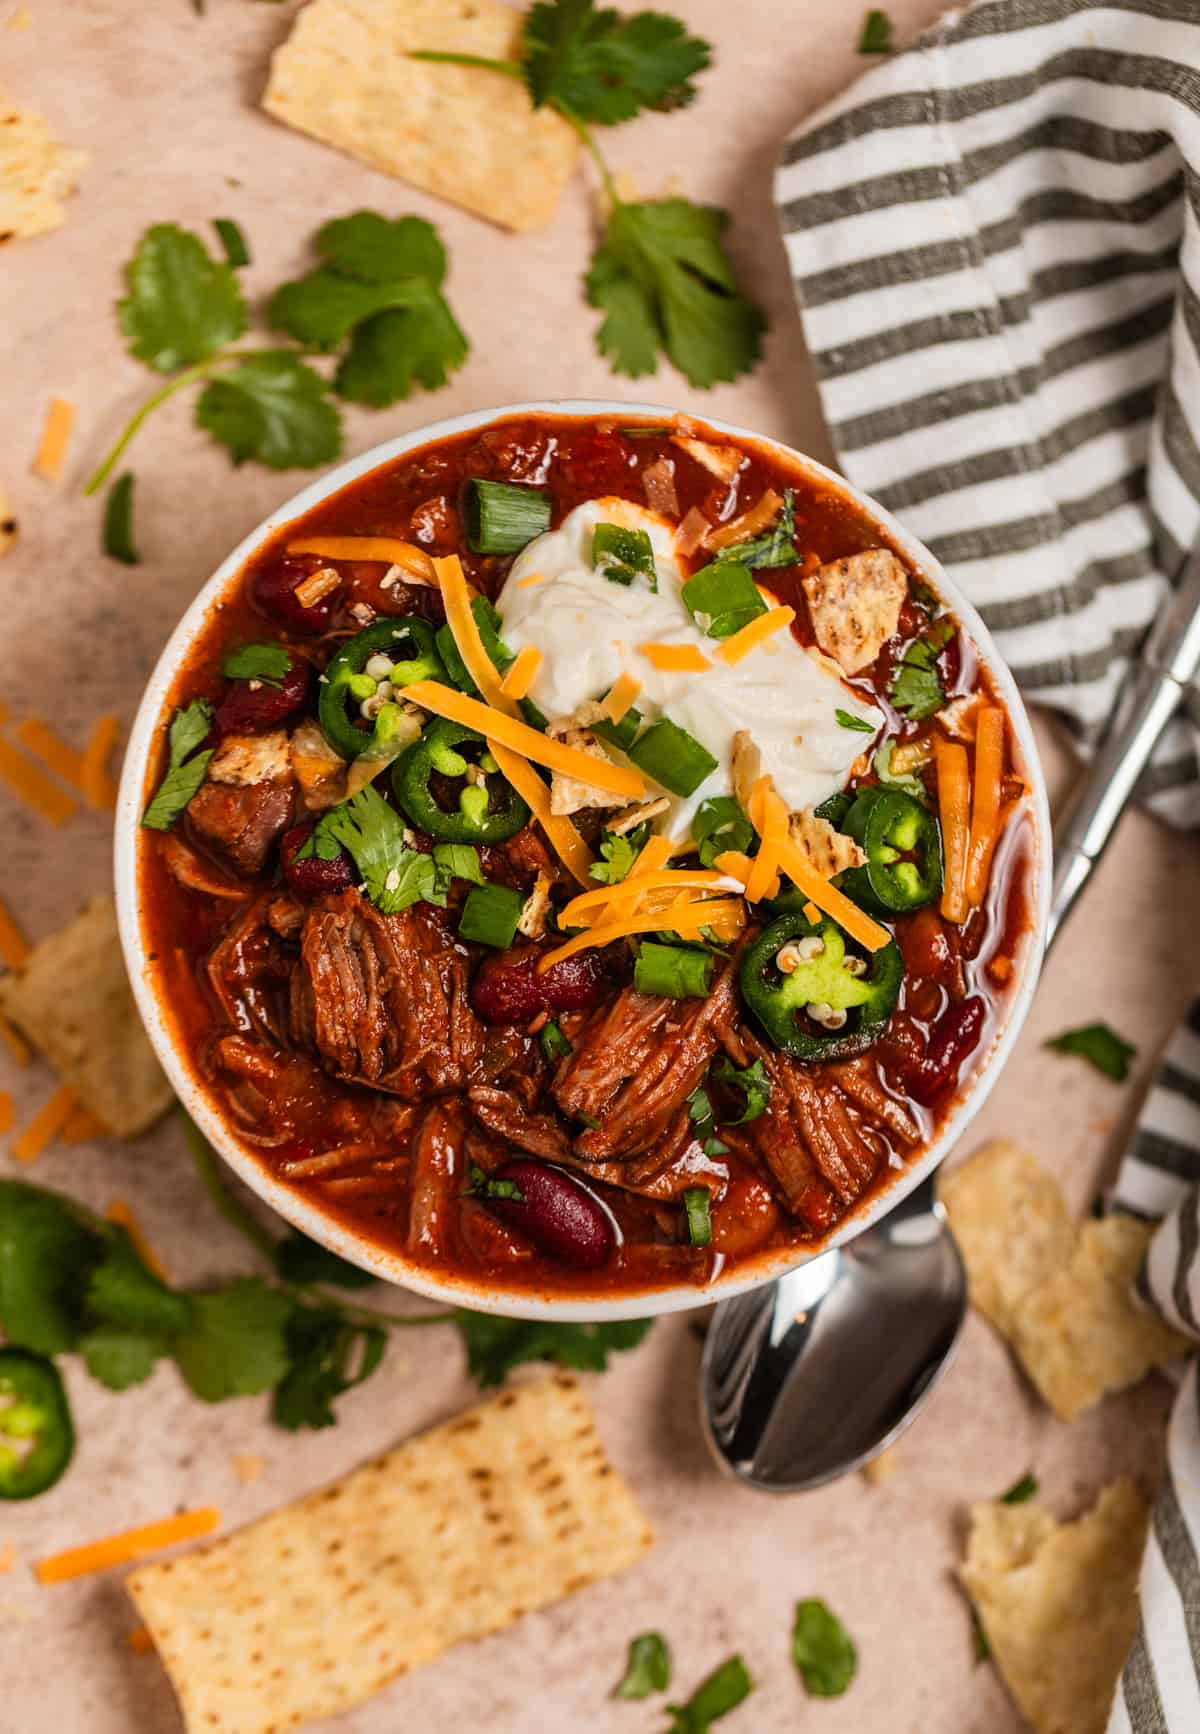 Overhead view of chili in bowl topped with sour cream, cheese, cilantro and other toppings.